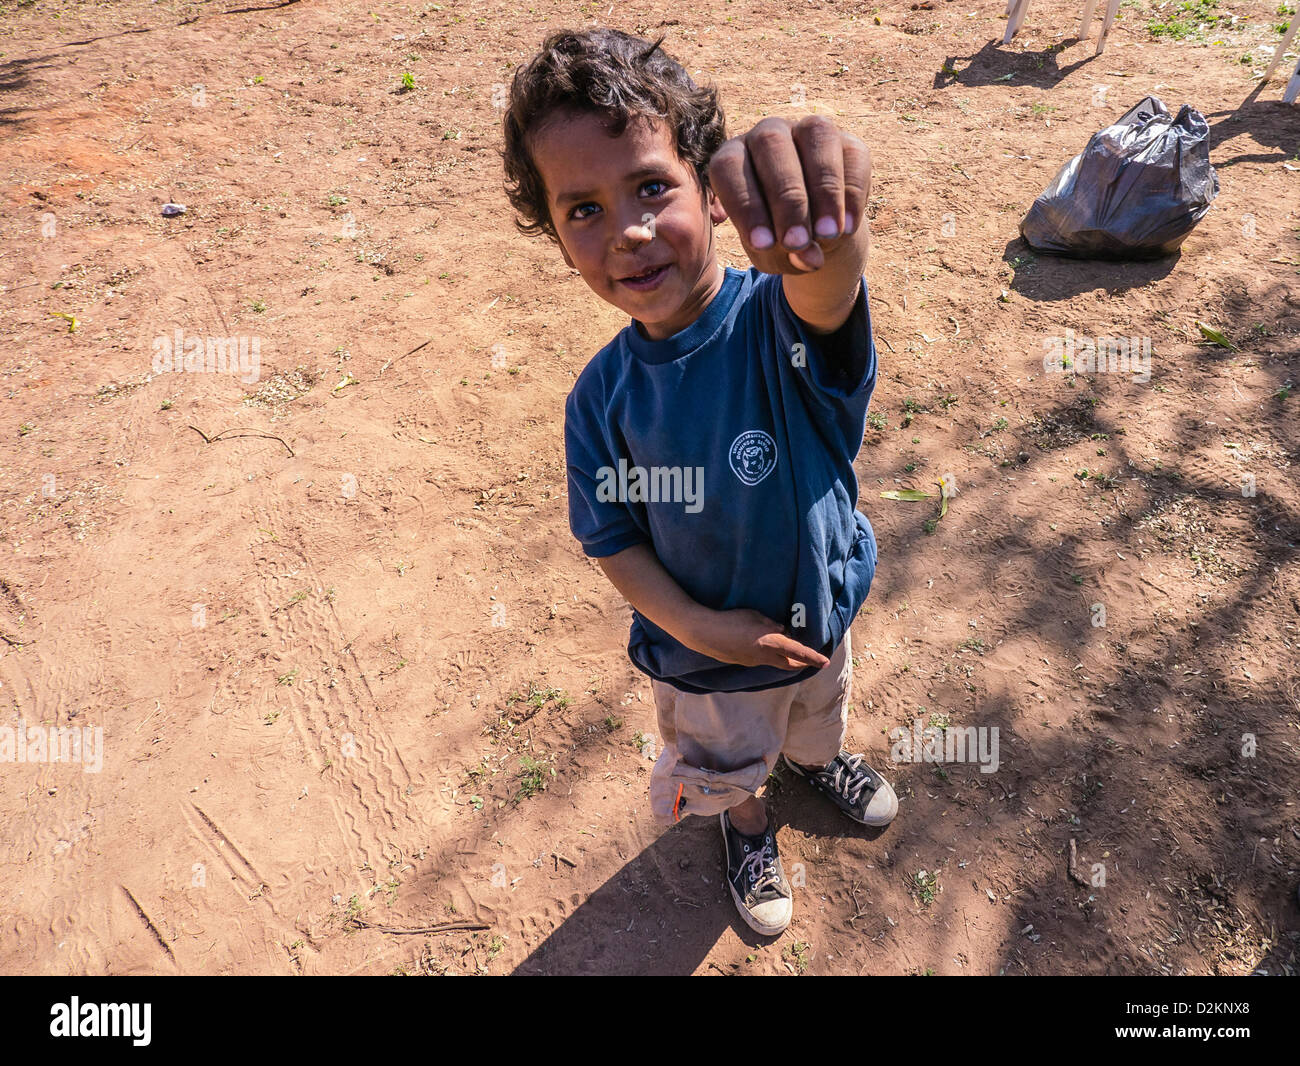 A view, looking down on a young boy in Paraguay holding his hand up and smiling. He wears a t-shirt and smiles. Stock Photo